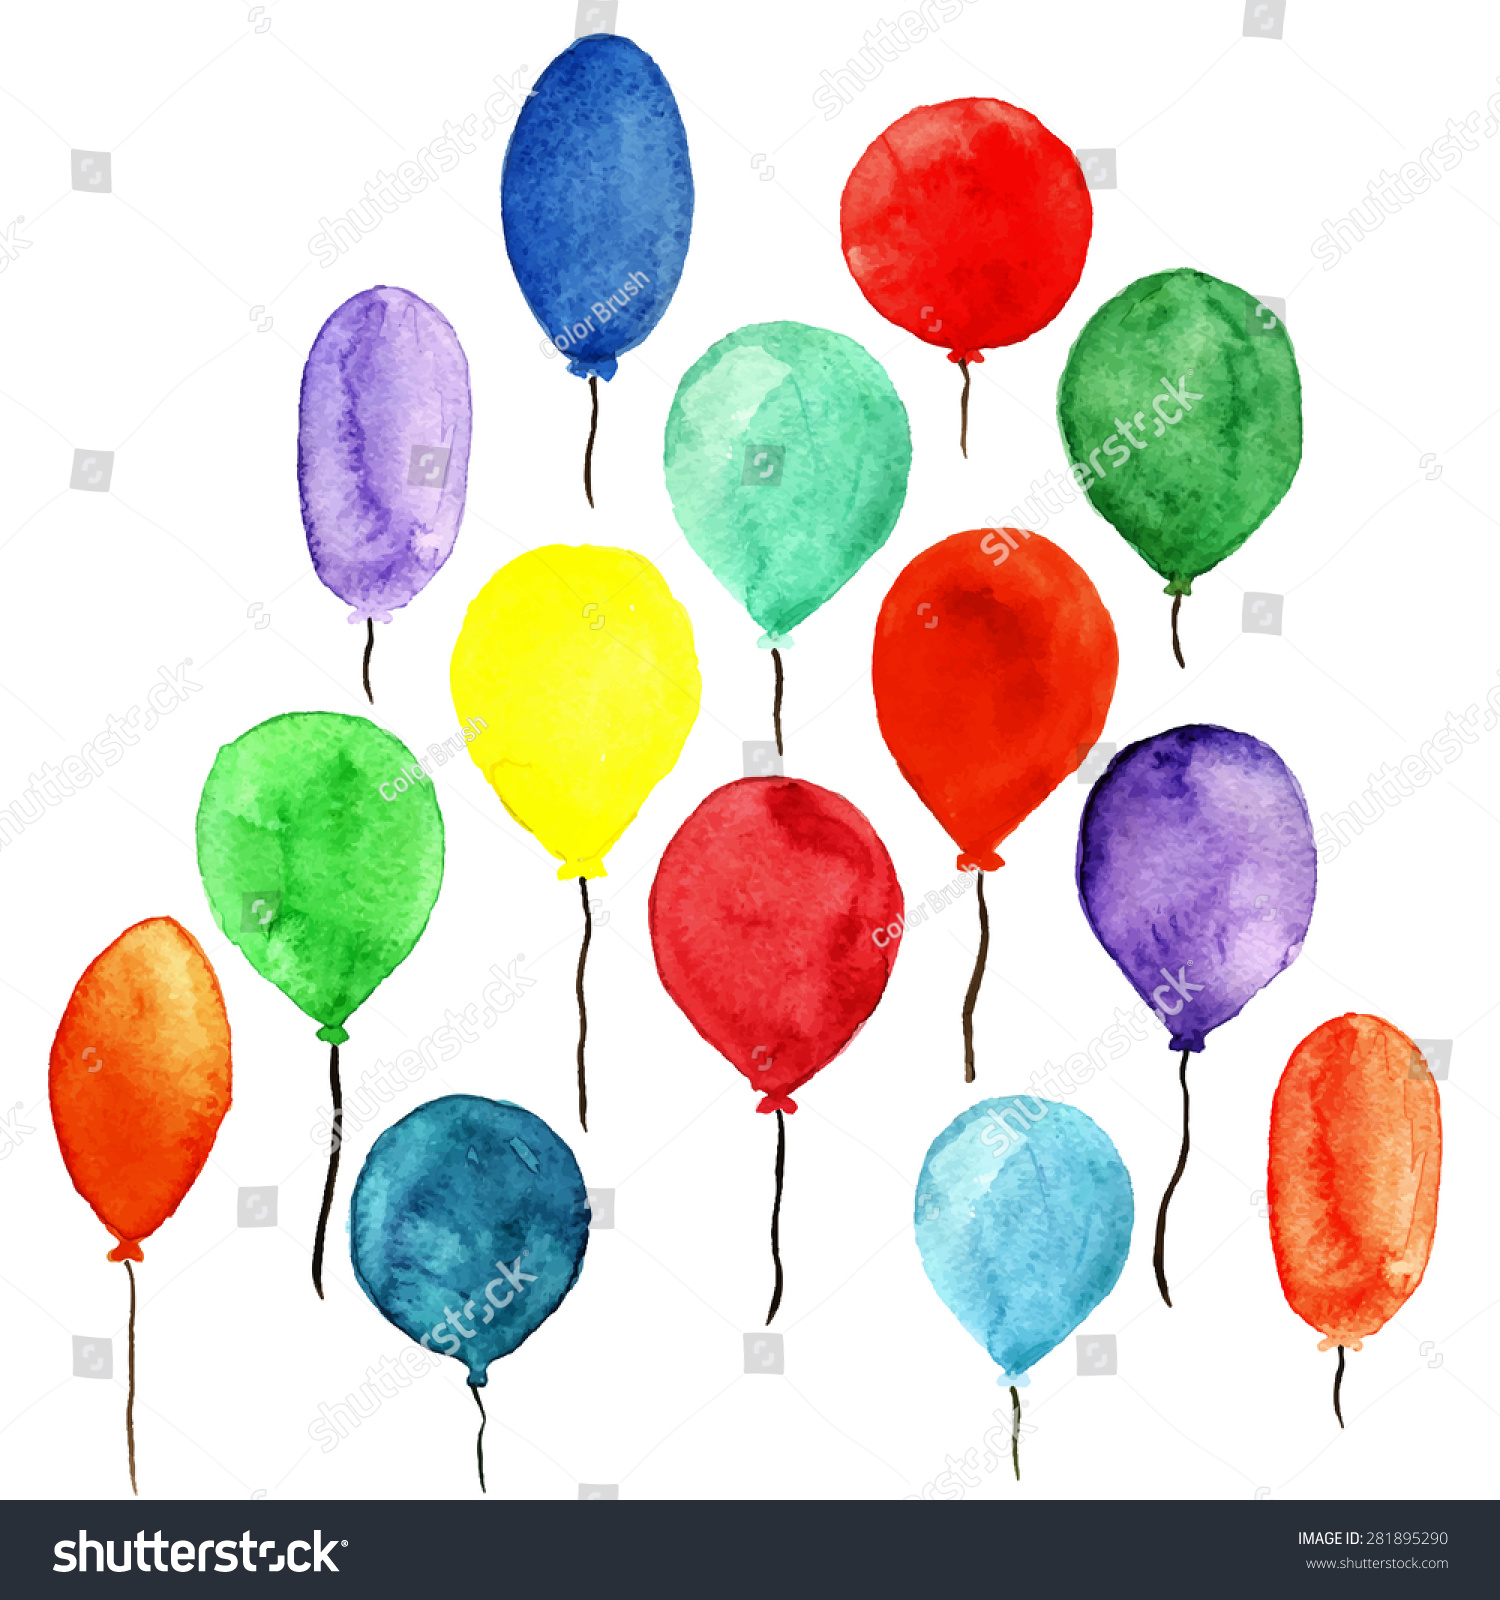 Water balloon drawing Stock Illustrations, Images & Vectors Shutterstock